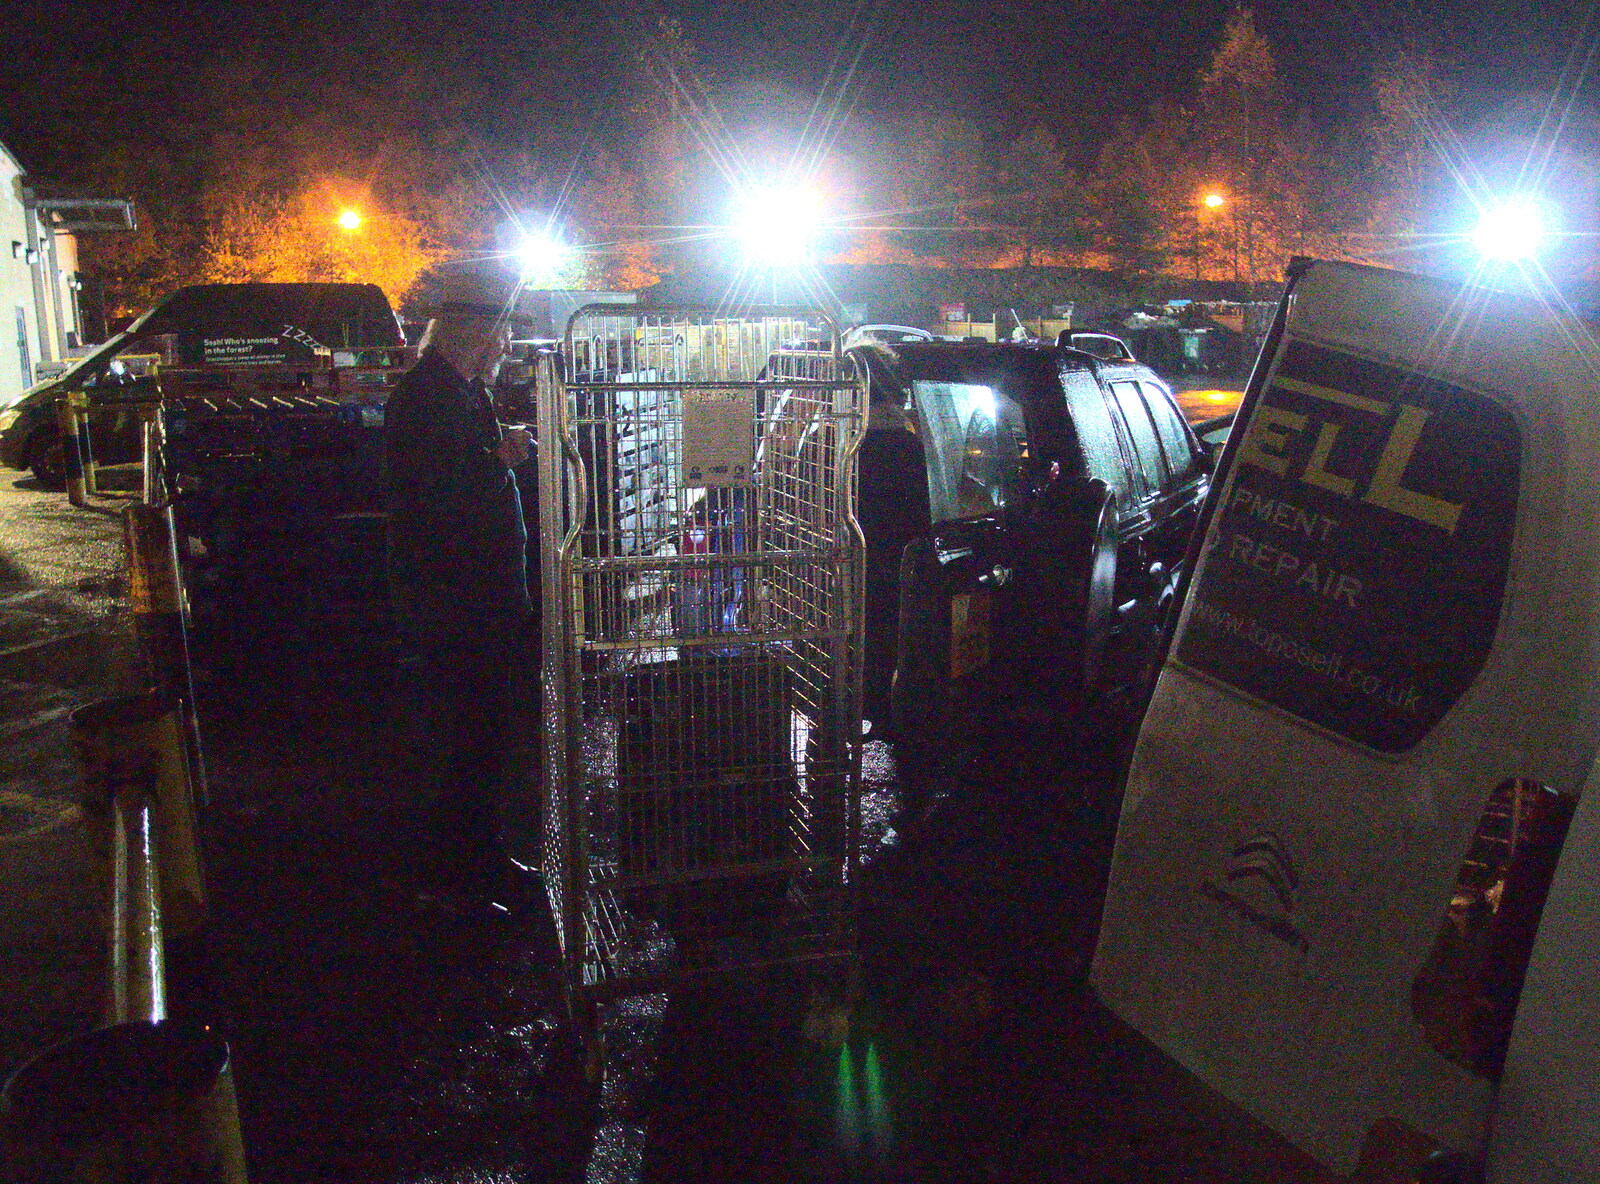 The band unloads in a wet and cold car park from The BBs at Centre Parcs, Elvedon, Norfolk - 5th November 2015